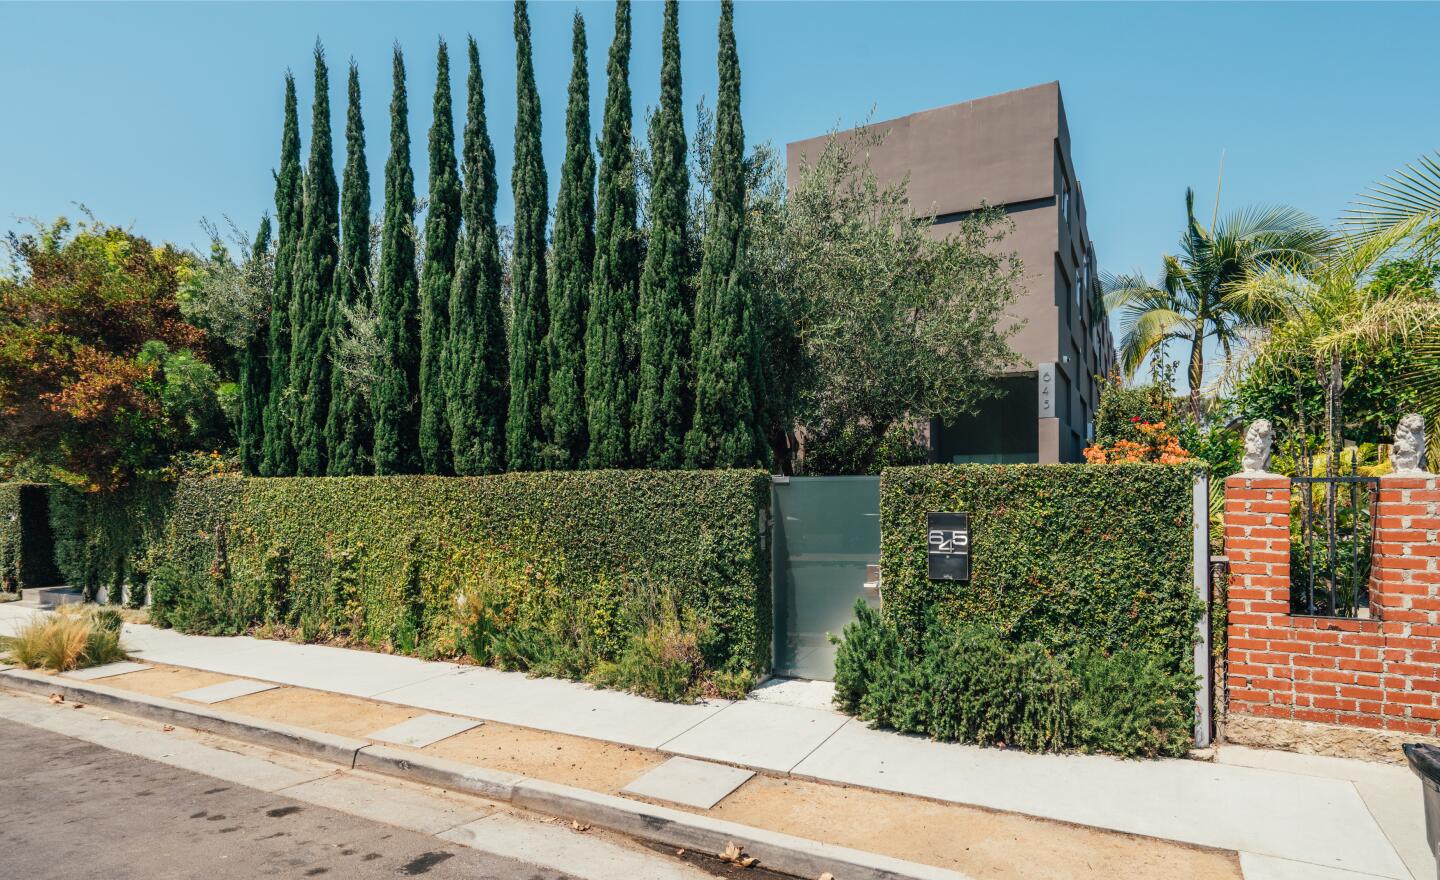 The exterior from the street shows part of the house, shrubbery and tall trees.